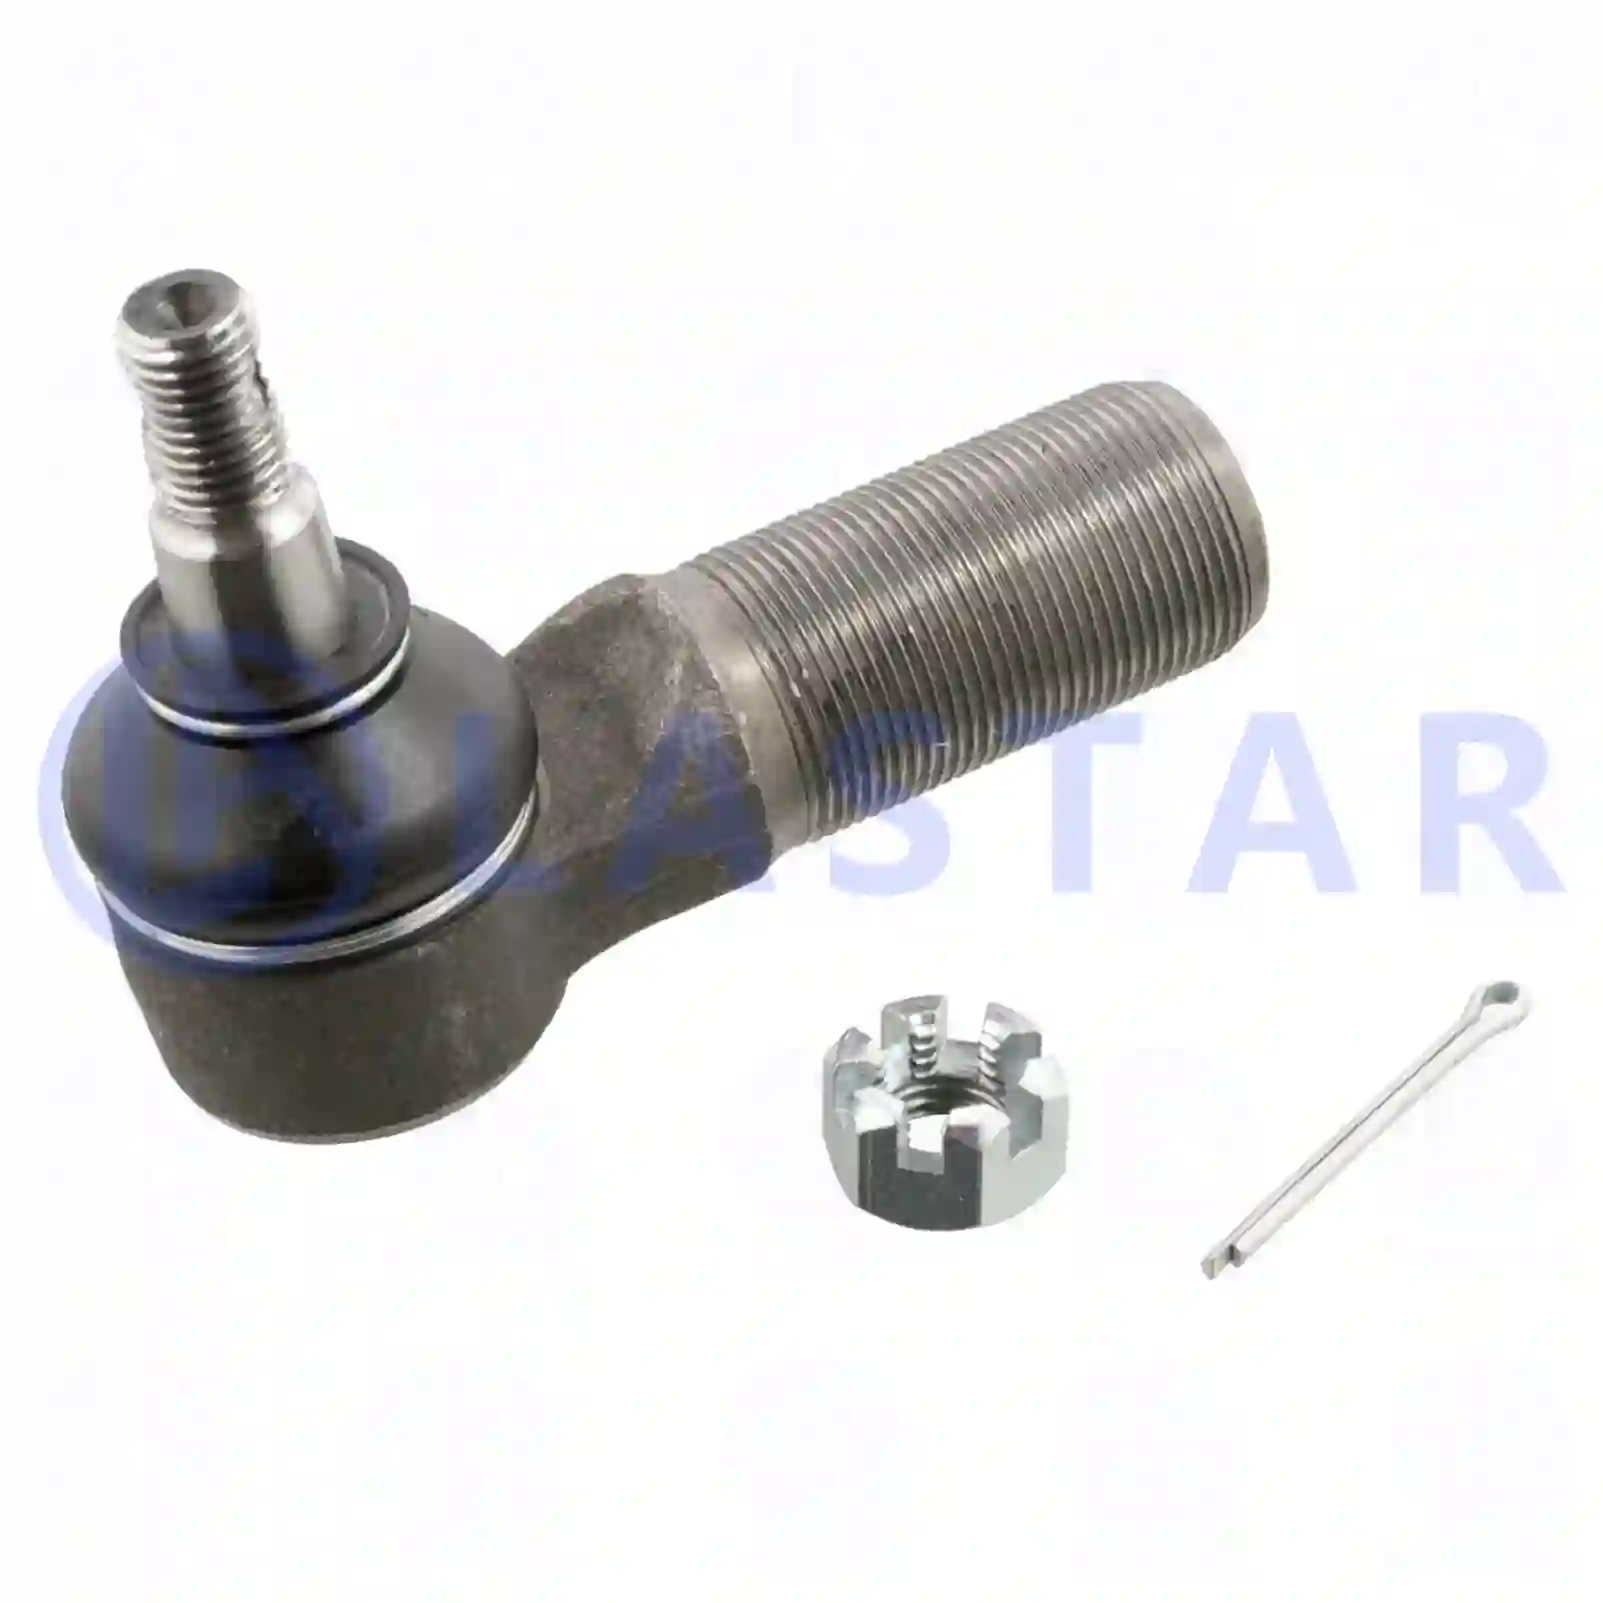 Ball joint, right hand thread, 77731871, 1527234, 1668638, 382745, ZG40140-0008, , , ||  77731871 Lastar Spare Part | Truck Spare Parts, Auotomotive Spare Parts Ball joint, right hand thread, 77731871, 1527234, 1668638, 382745, ZG40140-0008, , , ||  77731871 Lastar Spare Part | Truck Spare Parts, Auotomotive Spare Parts